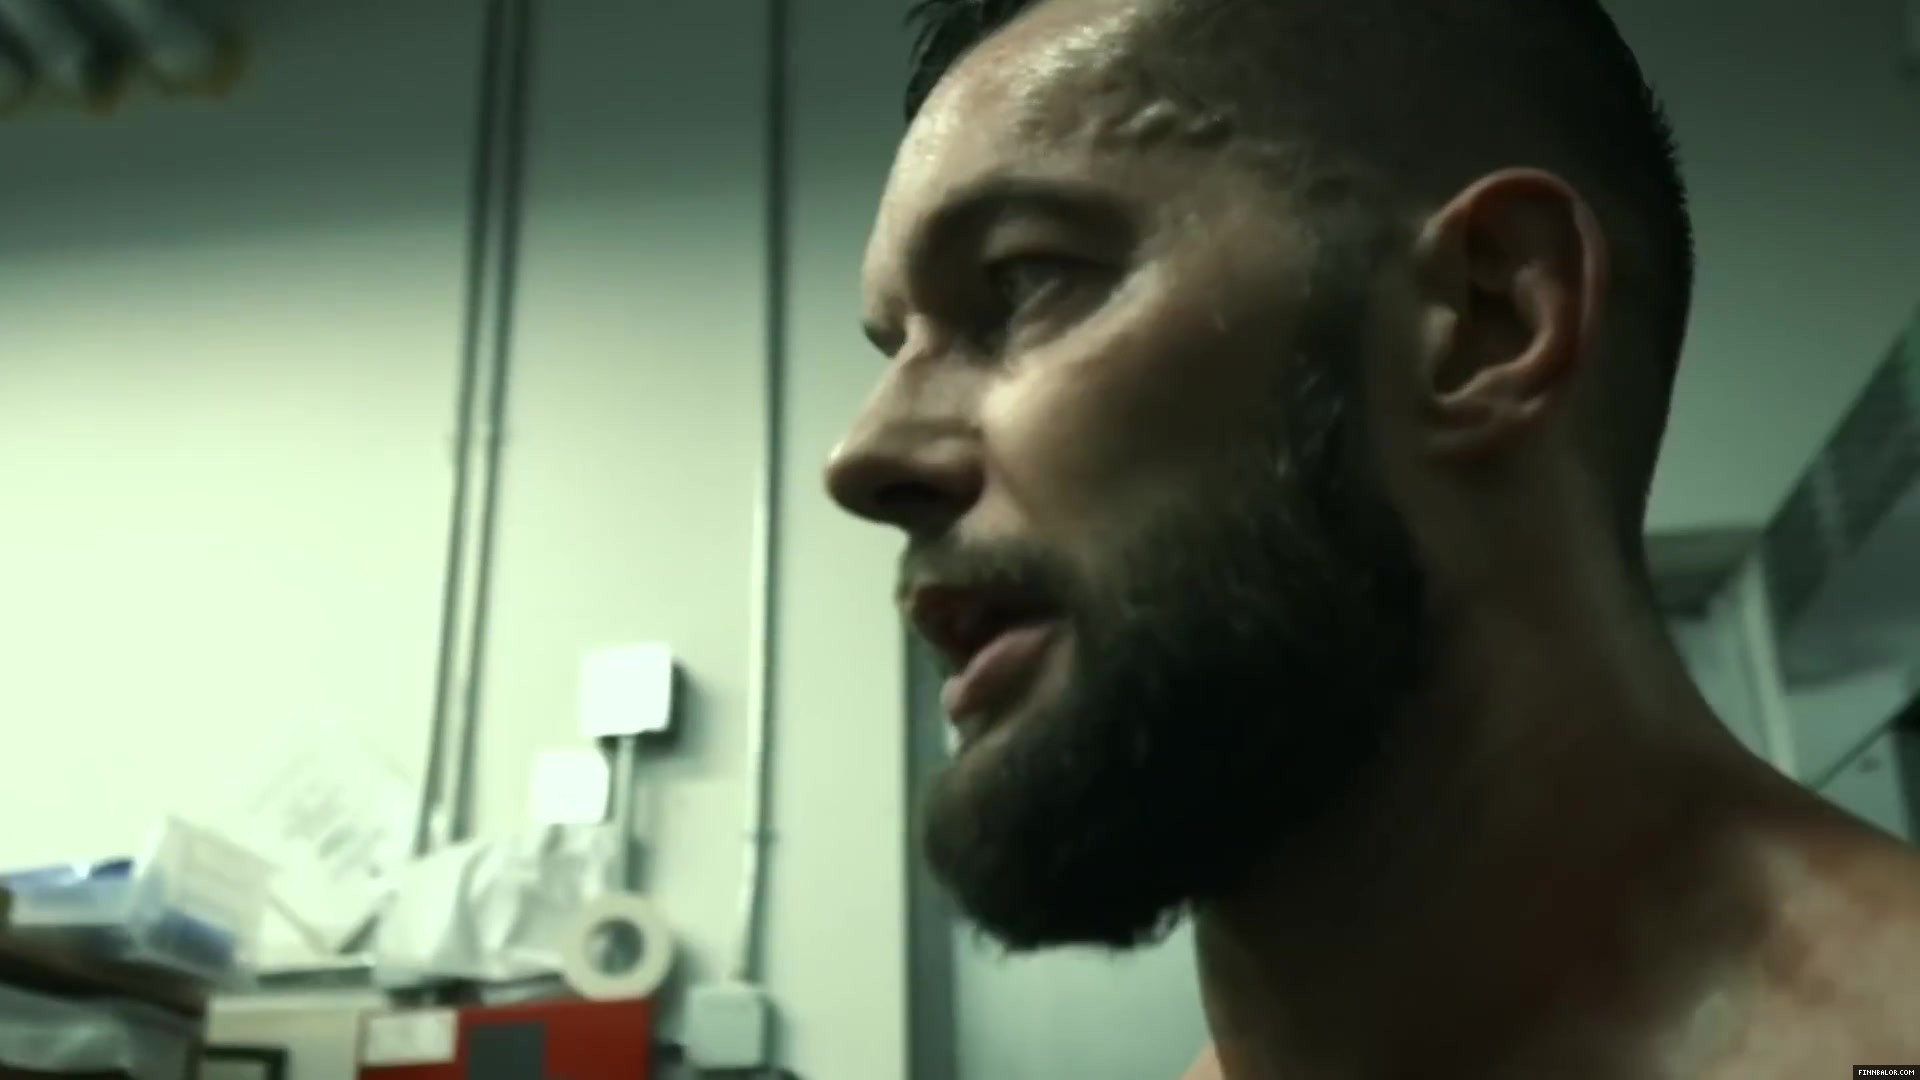 Finn_Balor___The_Rising_of_the_Prince_in_NXT_237.jpg